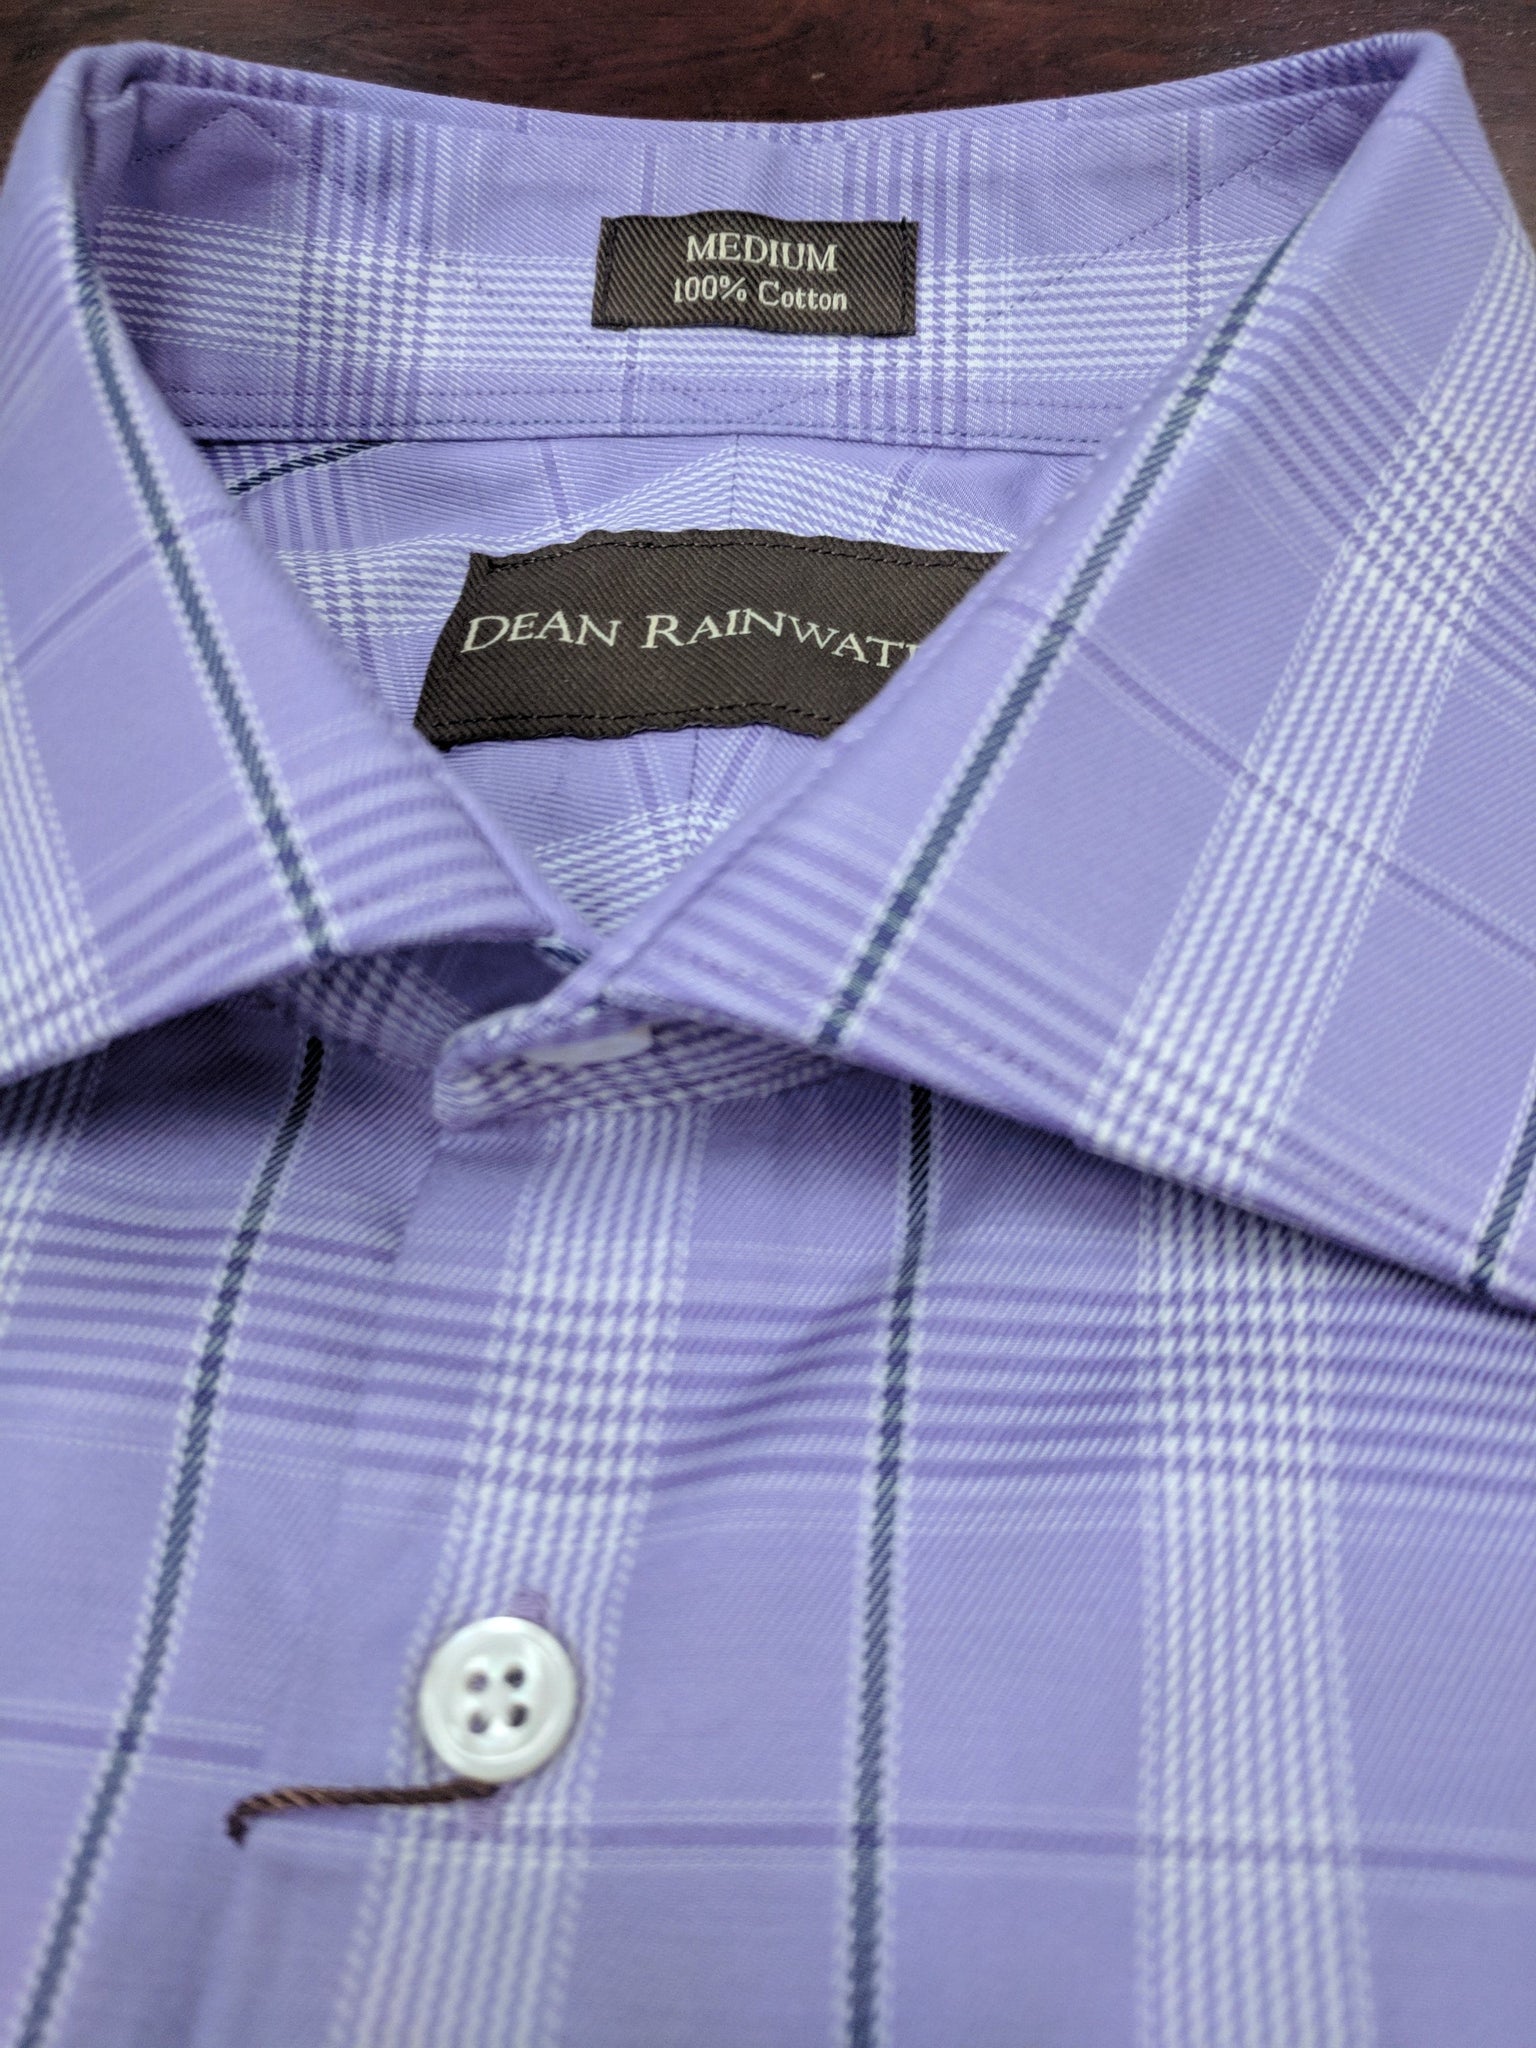 Purple Plaid Spread Collar Dress Shirt in 120's Two Ply 100% Cotton by Dean Rainwater - Rainwater's Men's Clothing and Tuxedo Rental